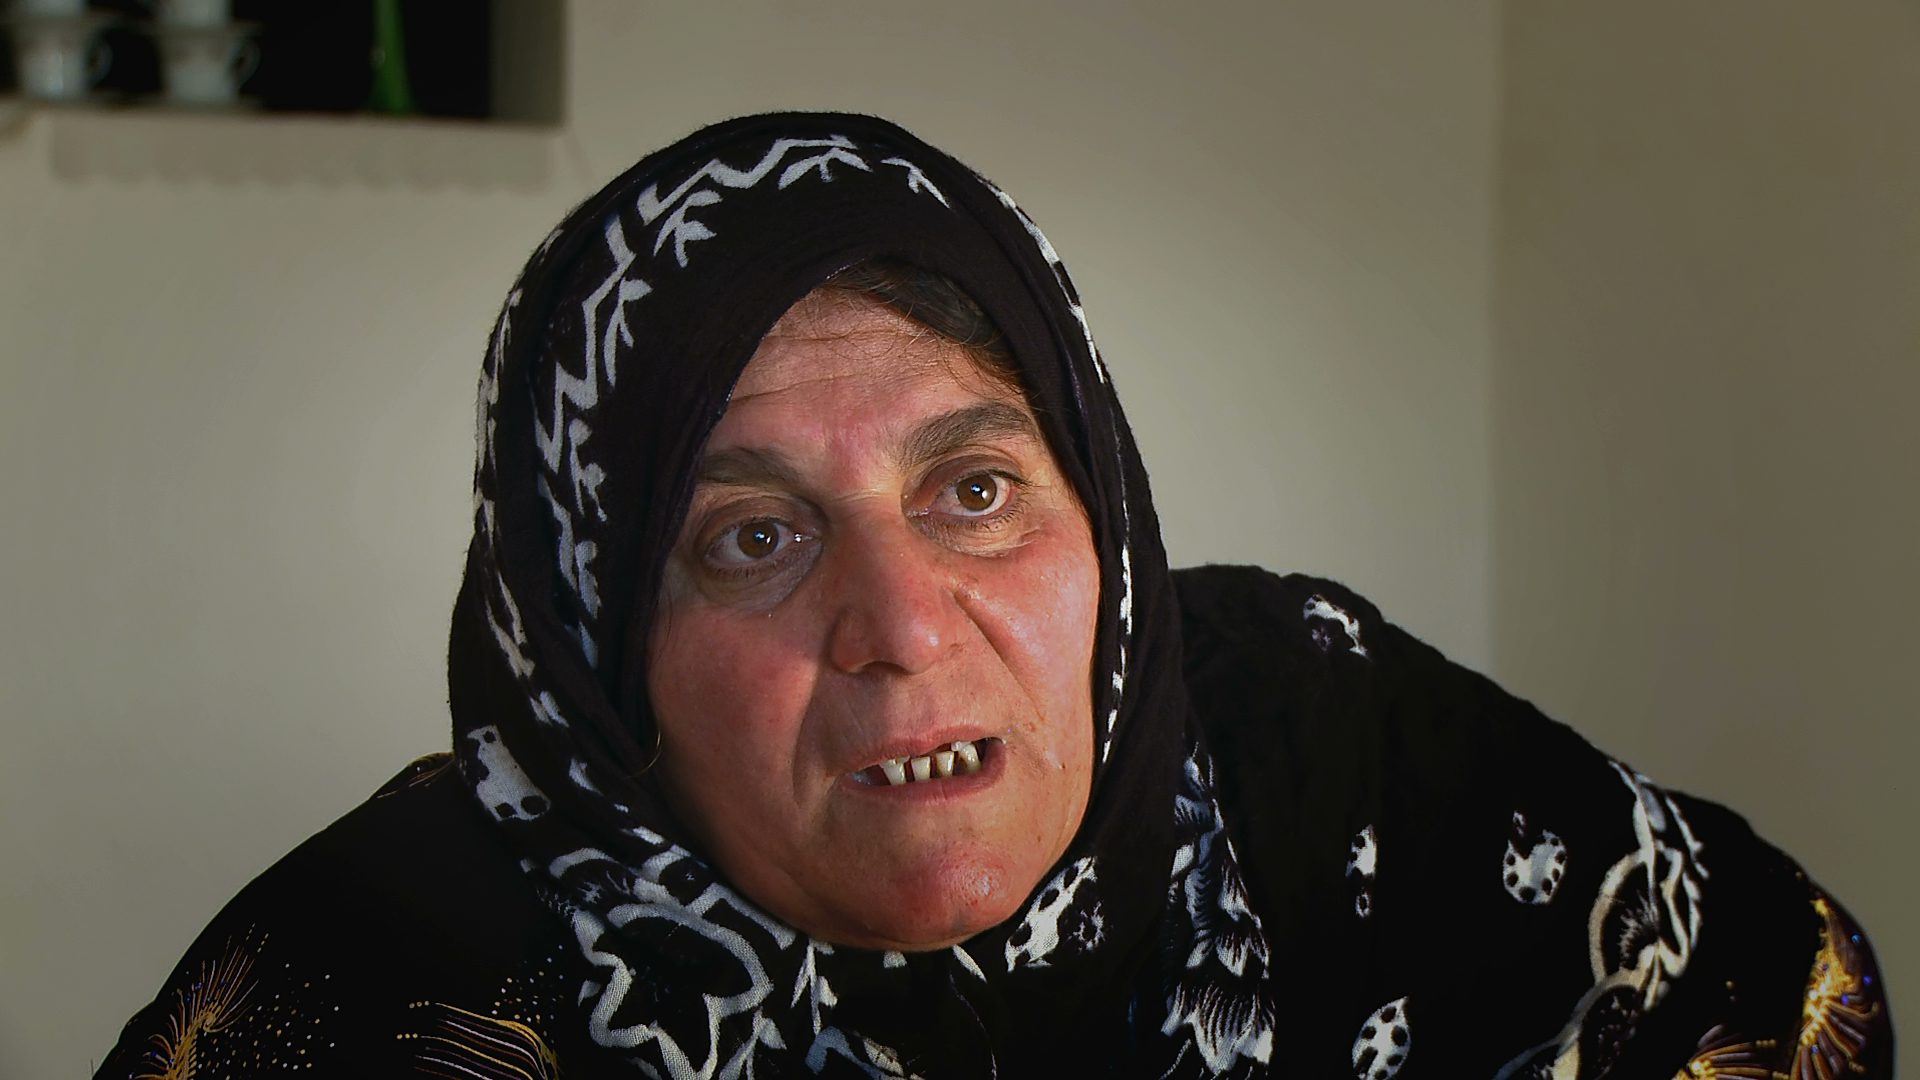 NAJEEBA OMAR MOHAMMED gave birth in late February 1988, on the day before her village, Haladin, was attacked with chemical weapons. Two villagers were killed and next day she and her family fled to Iran as the poison gas attacks intensified. 